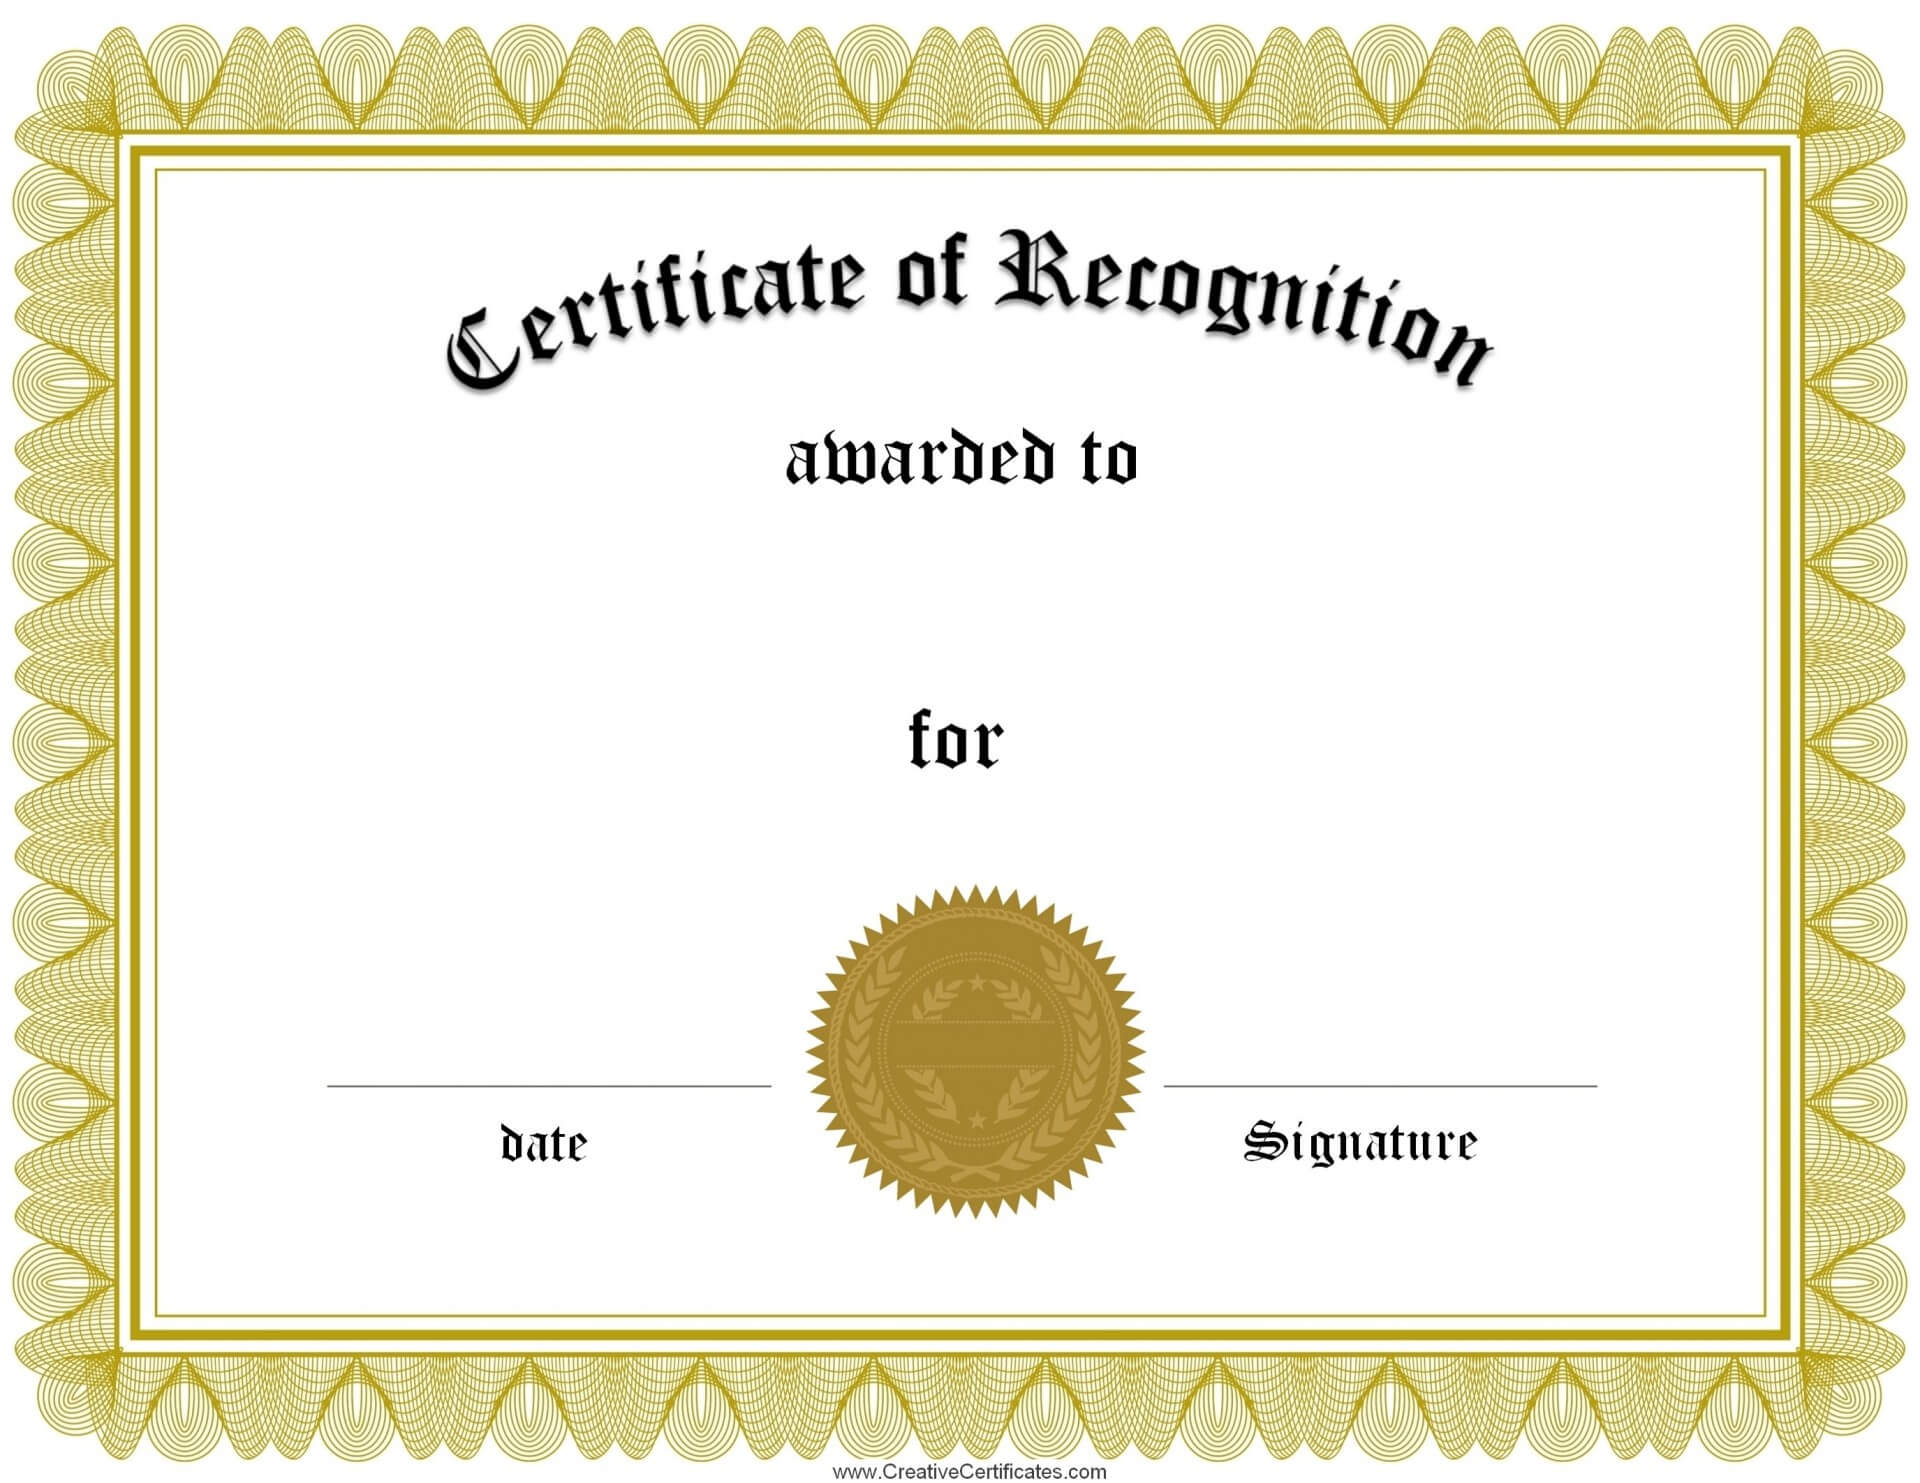 Certificate Of Recognition Template Word Editable Throughout Certificate Of Recognition Word Template